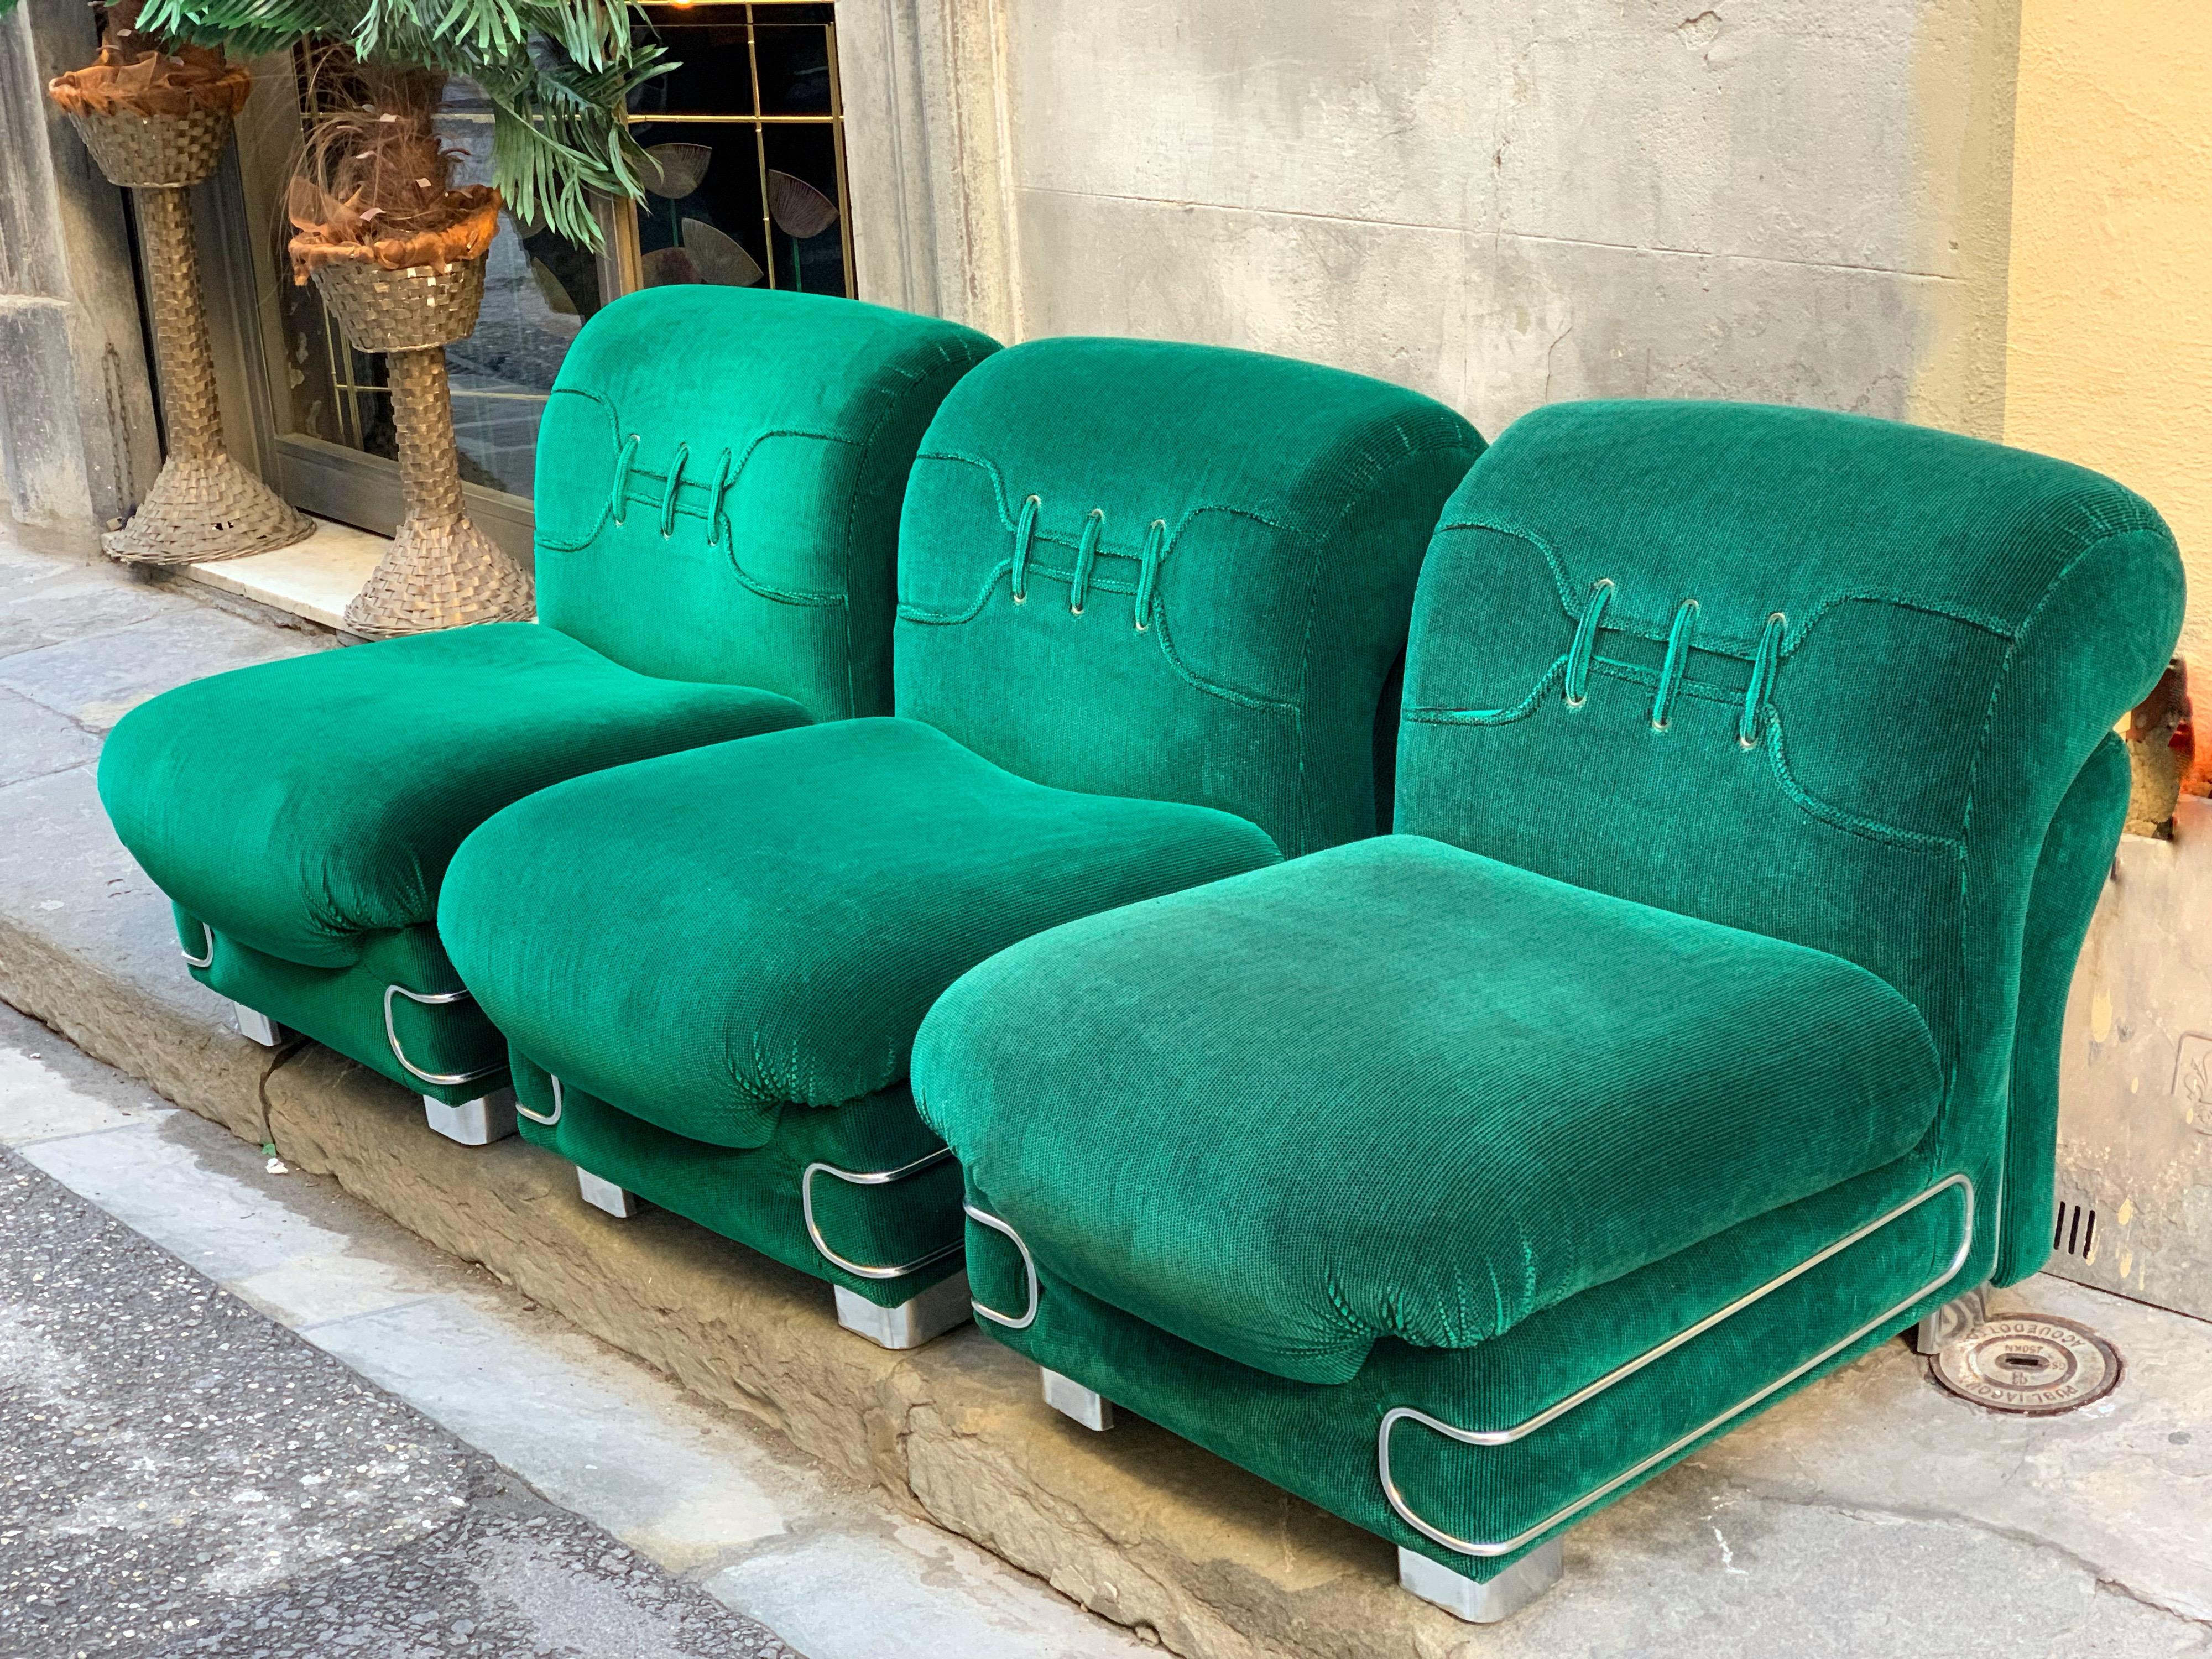 Set of three vintage green armchairs with chrome details.
Perfect Vintage Condition of the original green velvet woven with black thread.